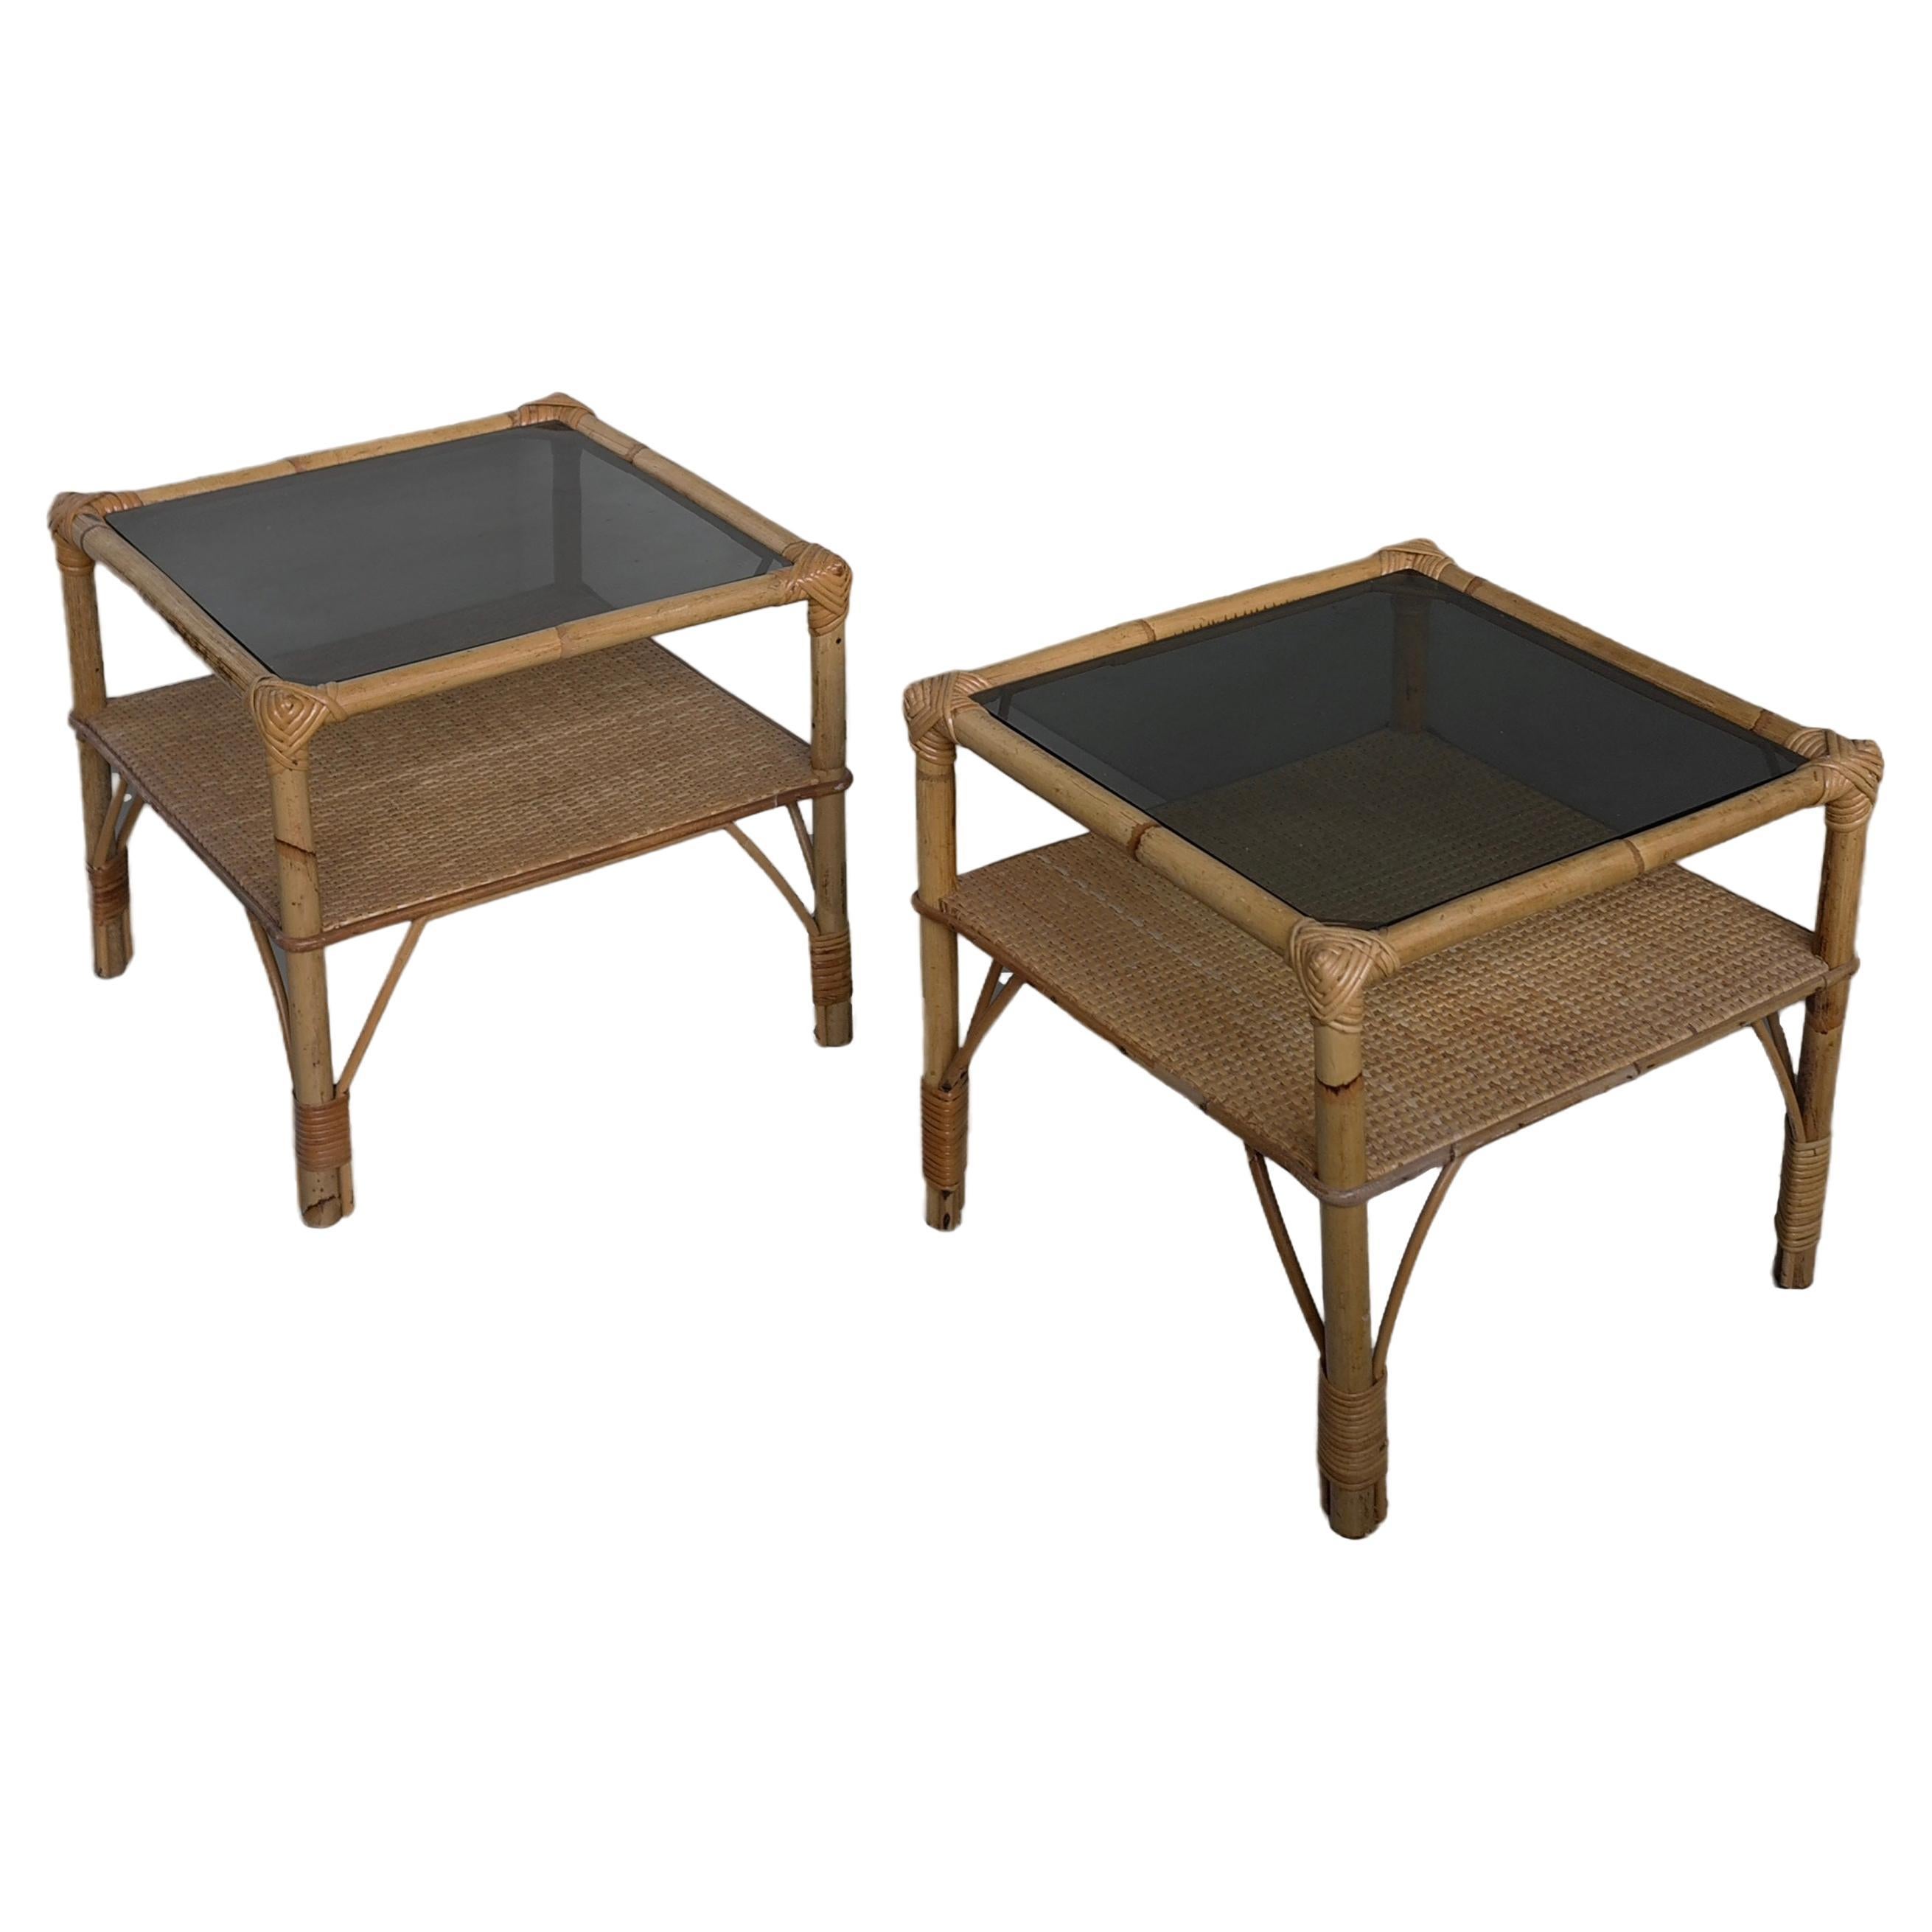 Pair of Bamboo and Smoked Glass Mid-Century Side Tables, France 1960's